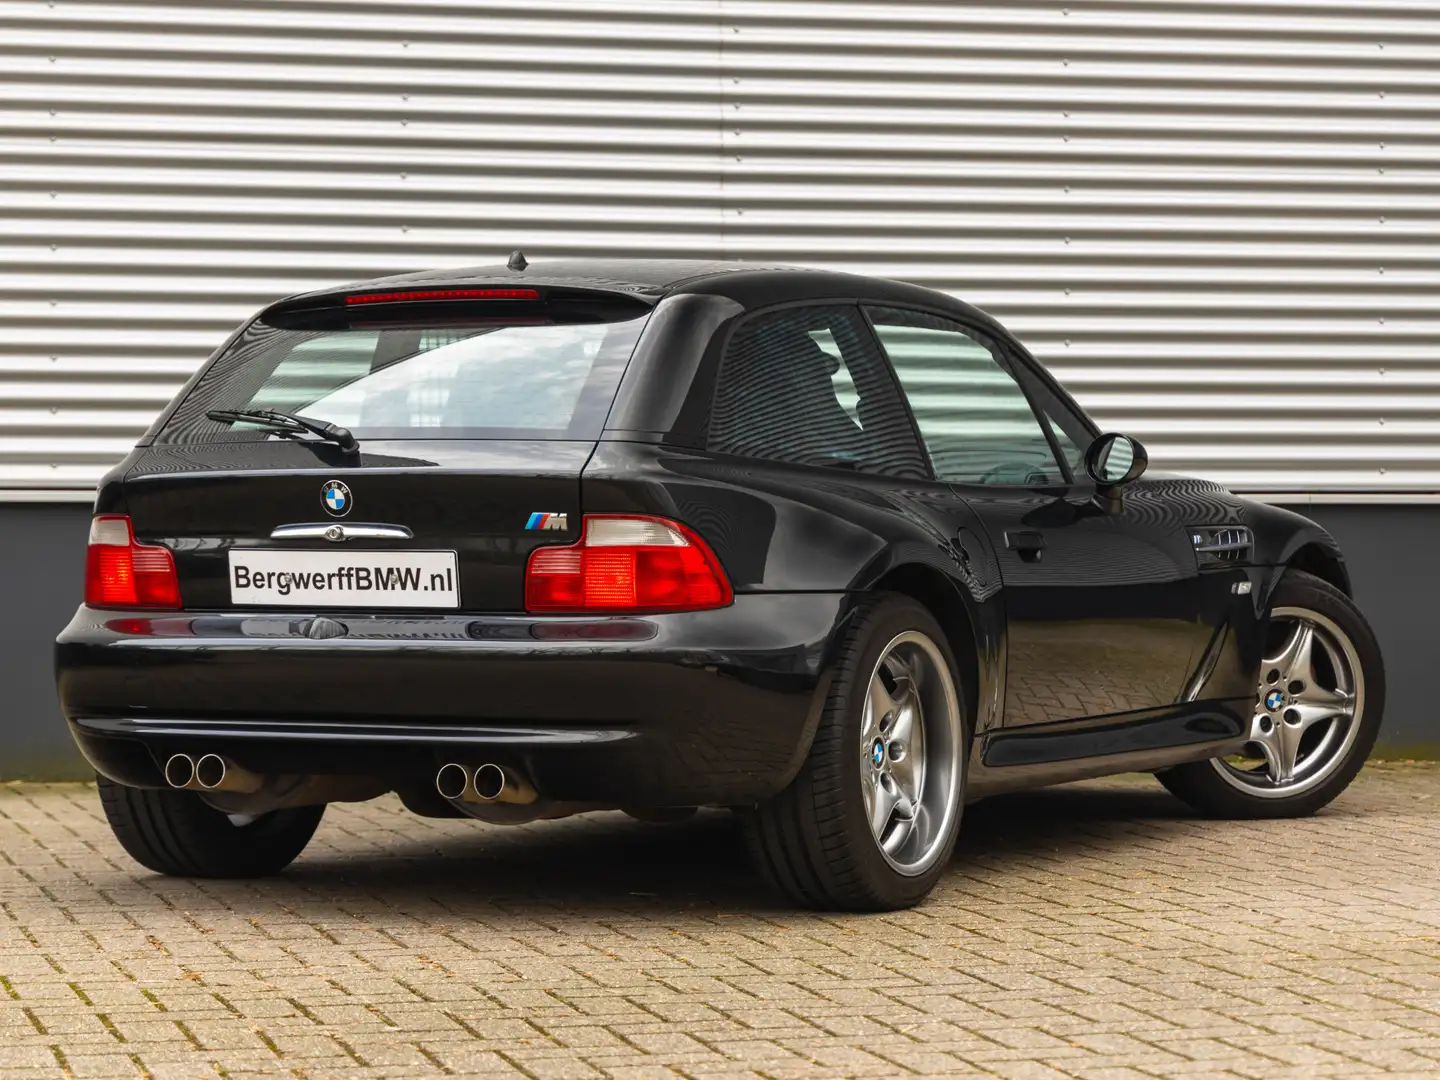 BMW Z3 M Coupé 3.2 M - S54 - 1 of 269 Fekete - 2